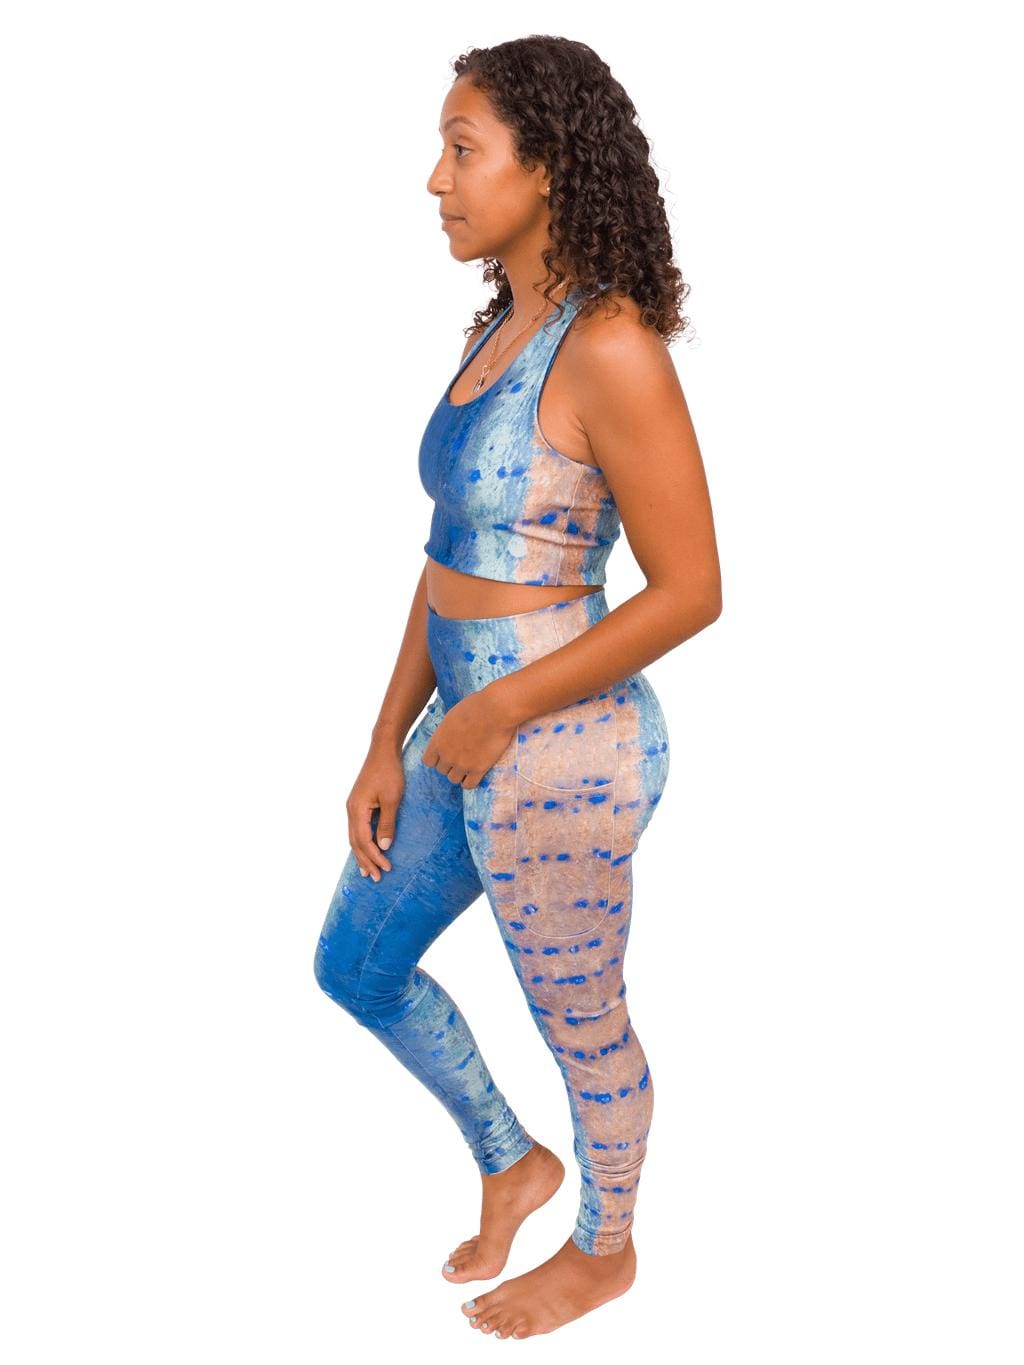 Model: Gabrielle works in coral reef restoration and strives to end single-use plastic in her daily routine. She is 5&#39;4&quot;, 135lbs, 34C and is wearing a M top and M leggings.